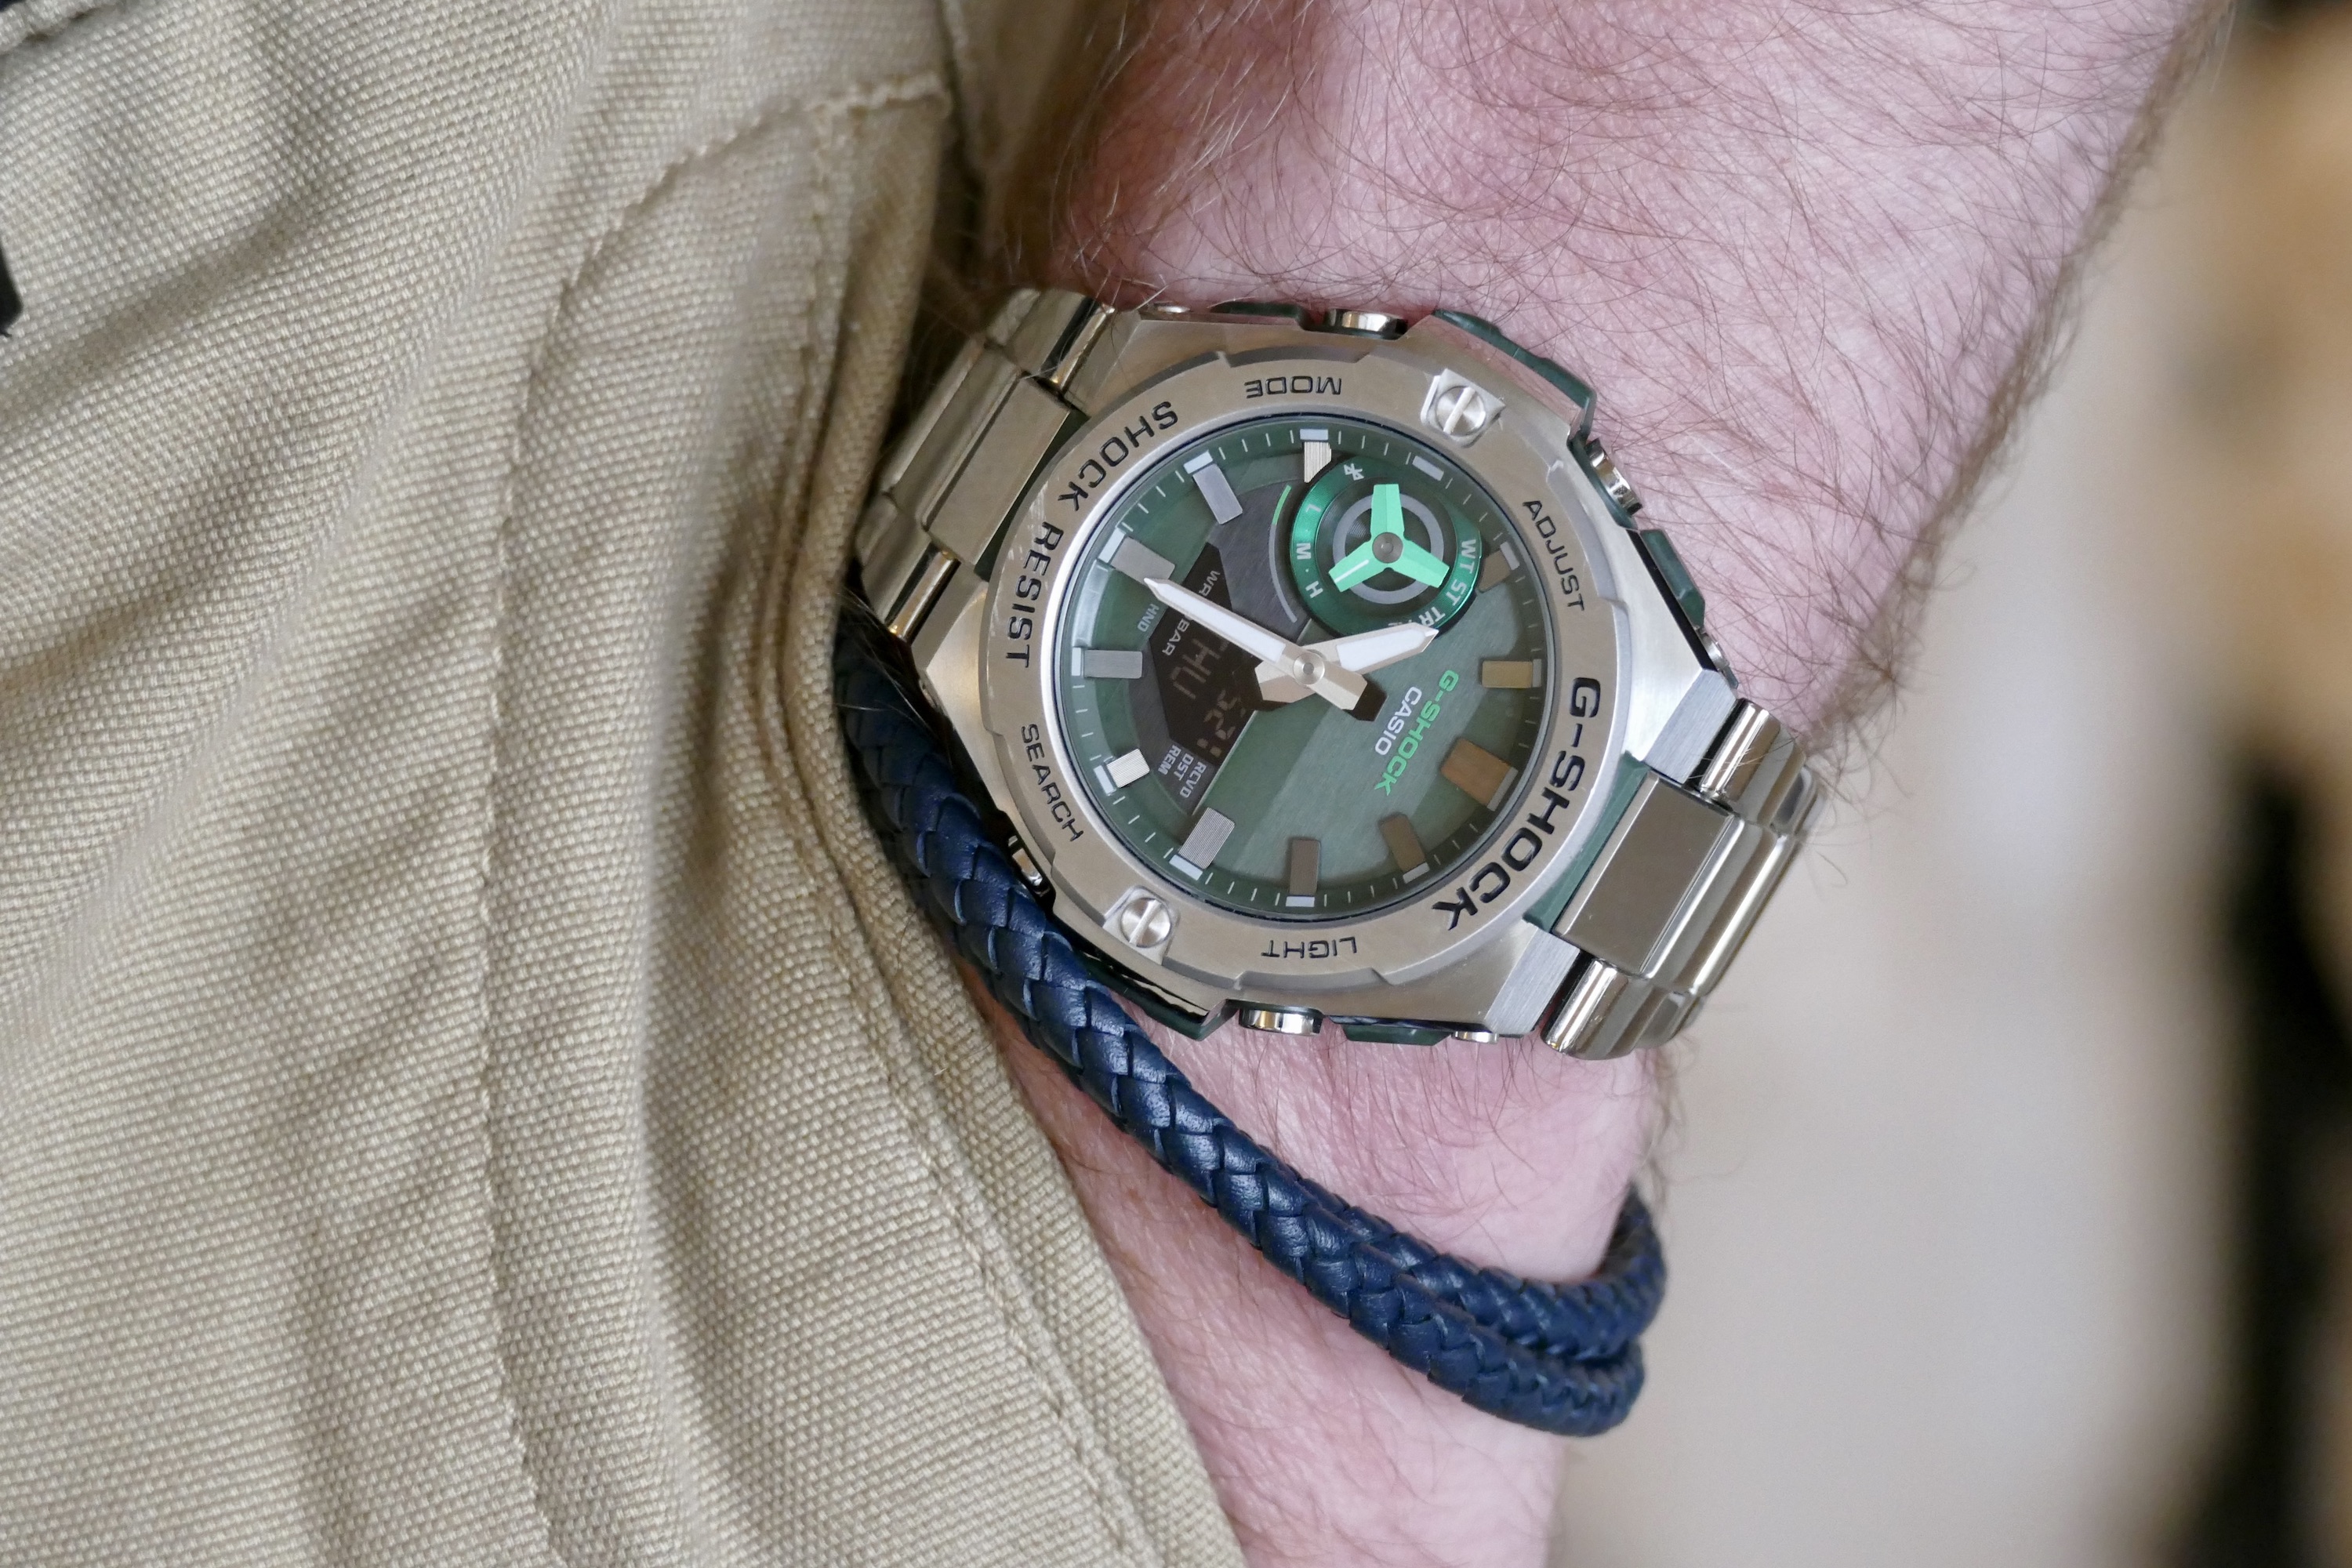 The G-Steel B500 is the most comfortable G-Shock I've worn